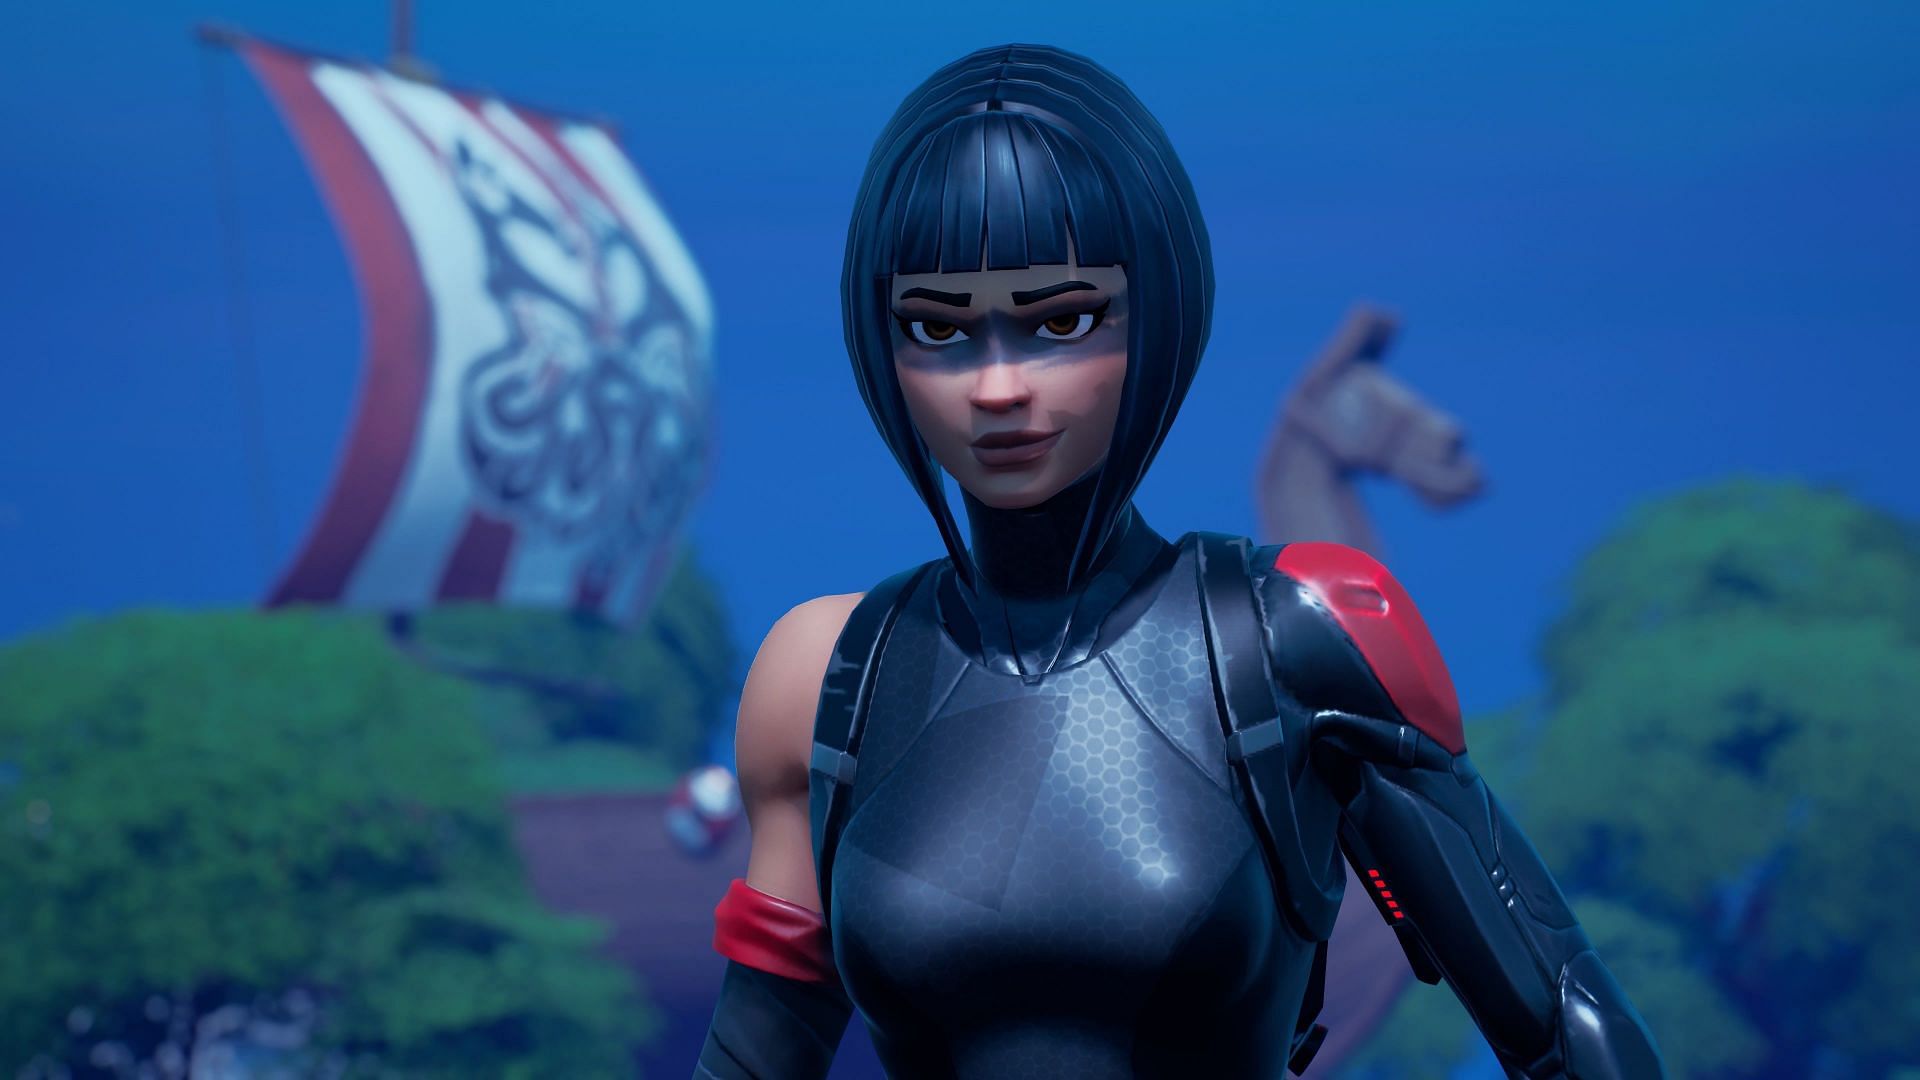 How to get Shadow Ops Skin in Fortnite (Image via Epic Games/Fortnite||X/jaydiiel)